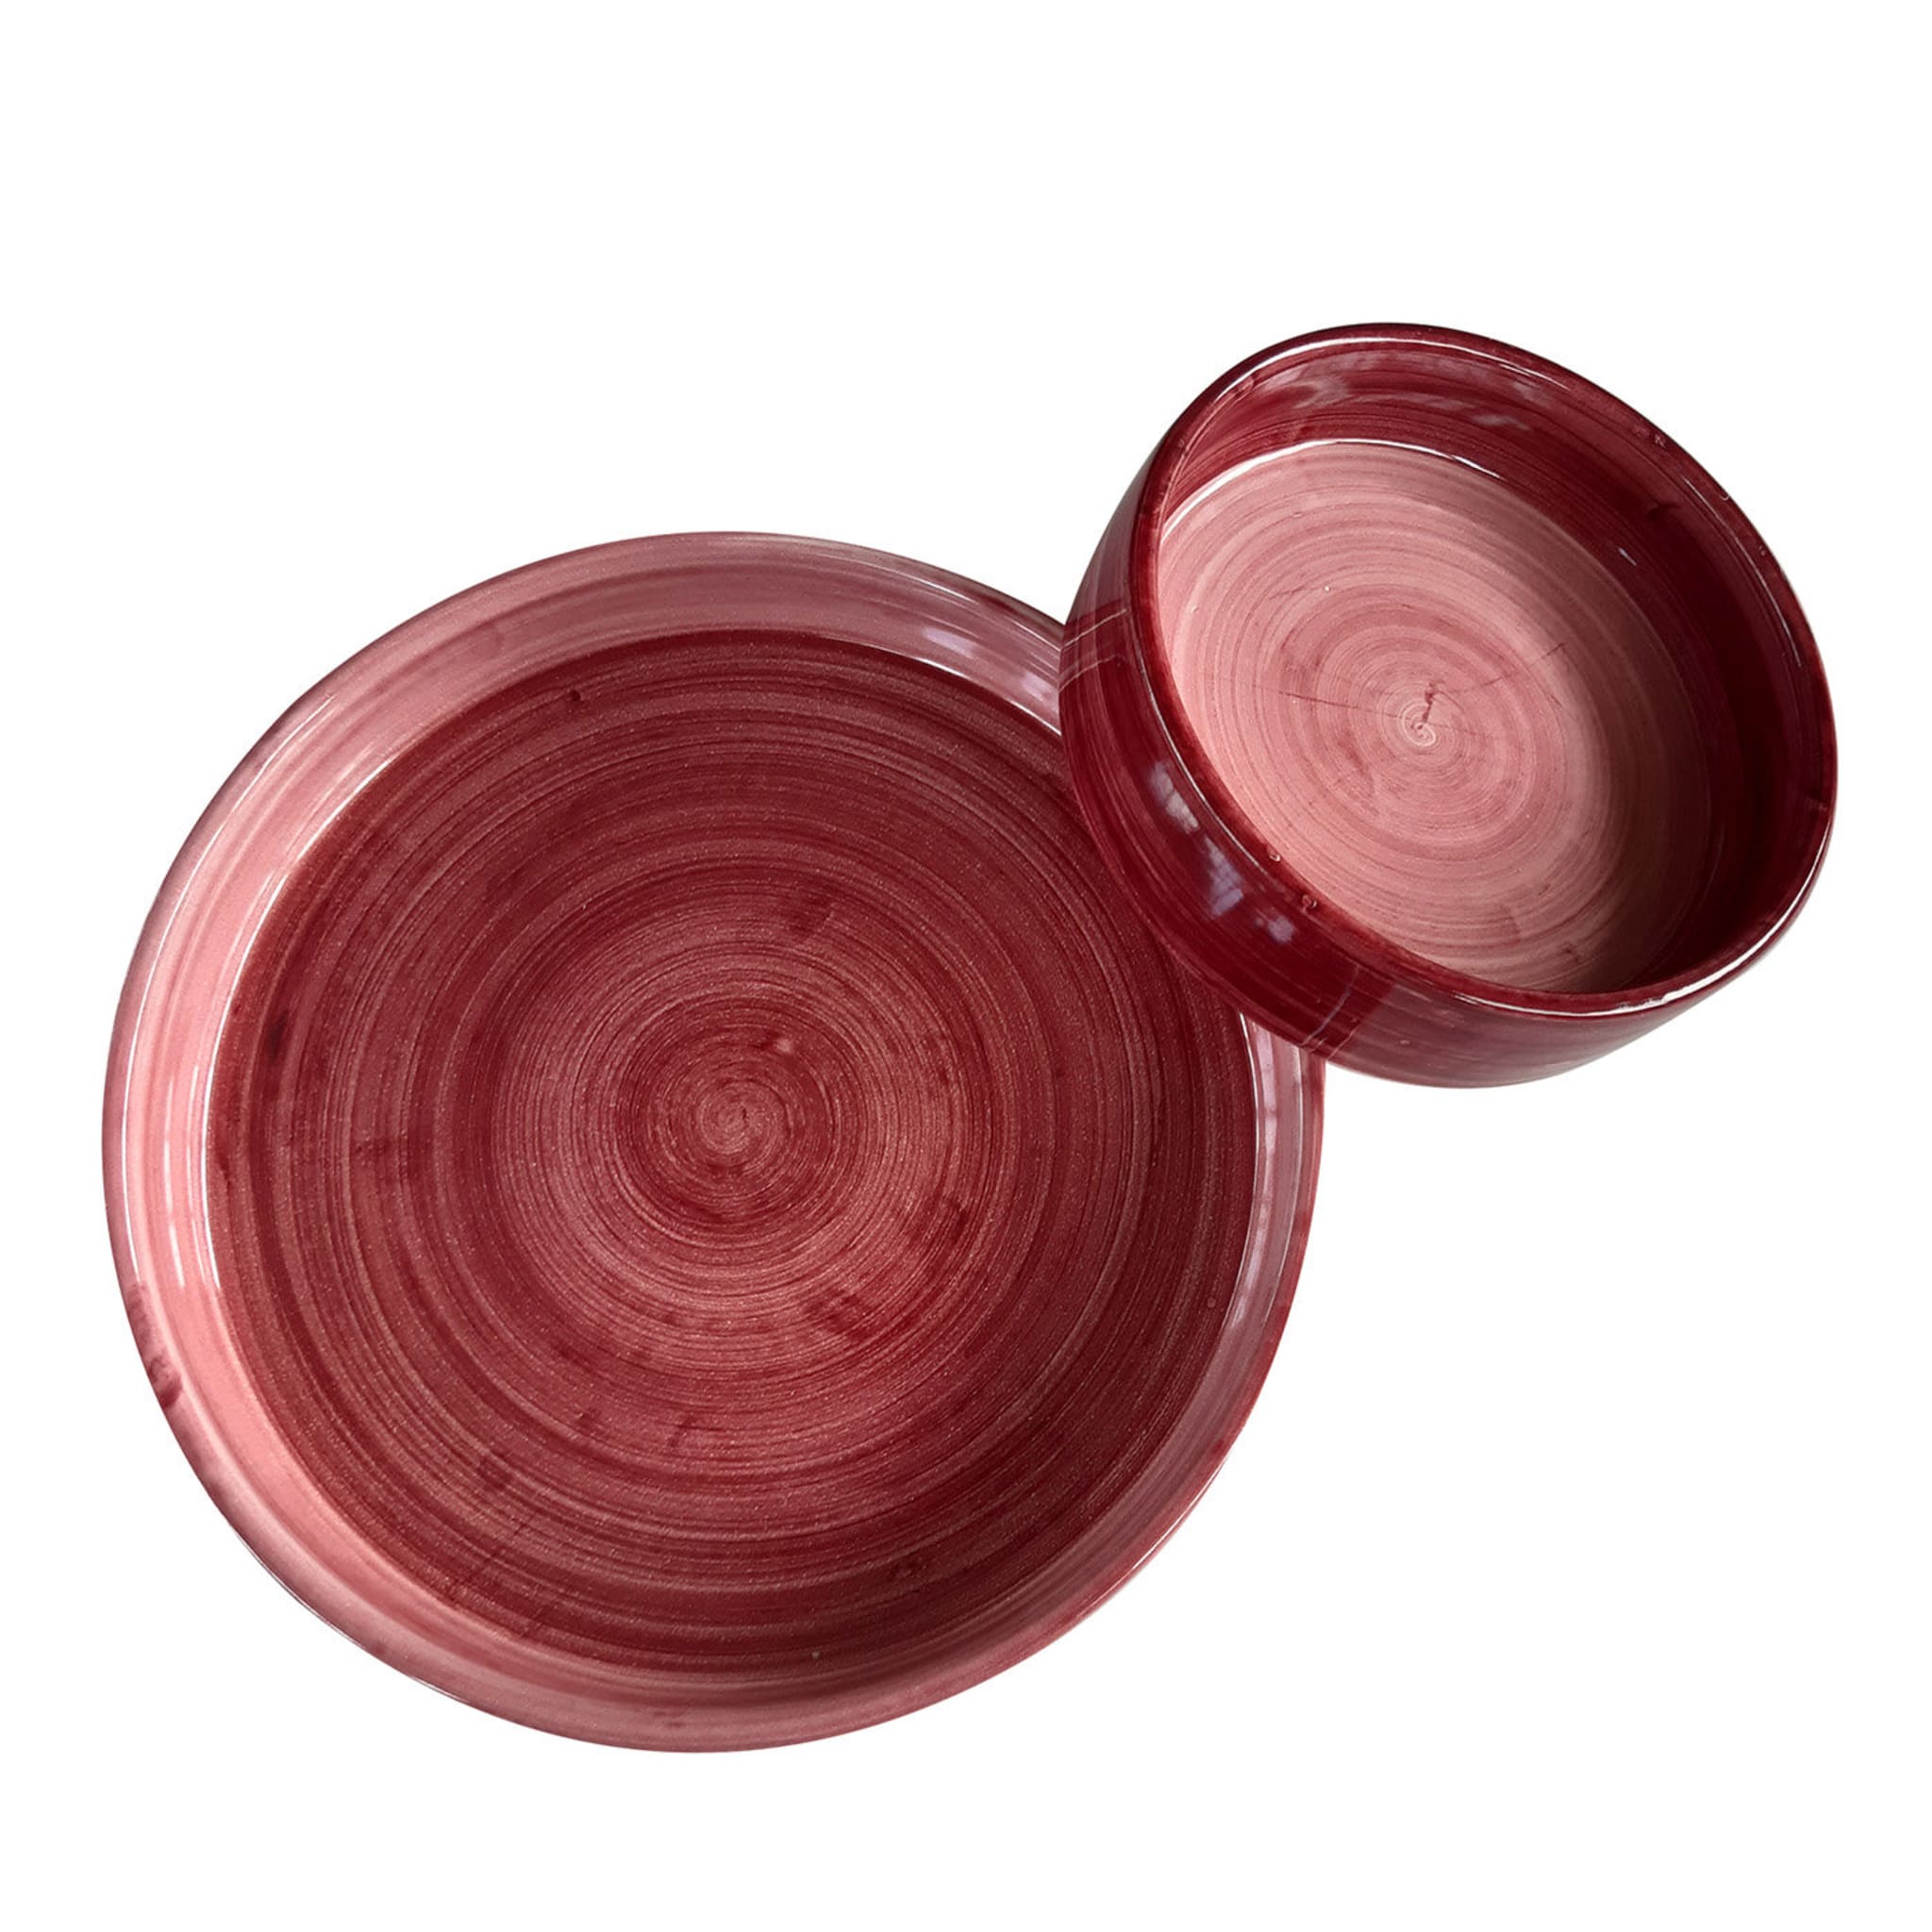 Coccio Set of 2 Red Bowls - Main view